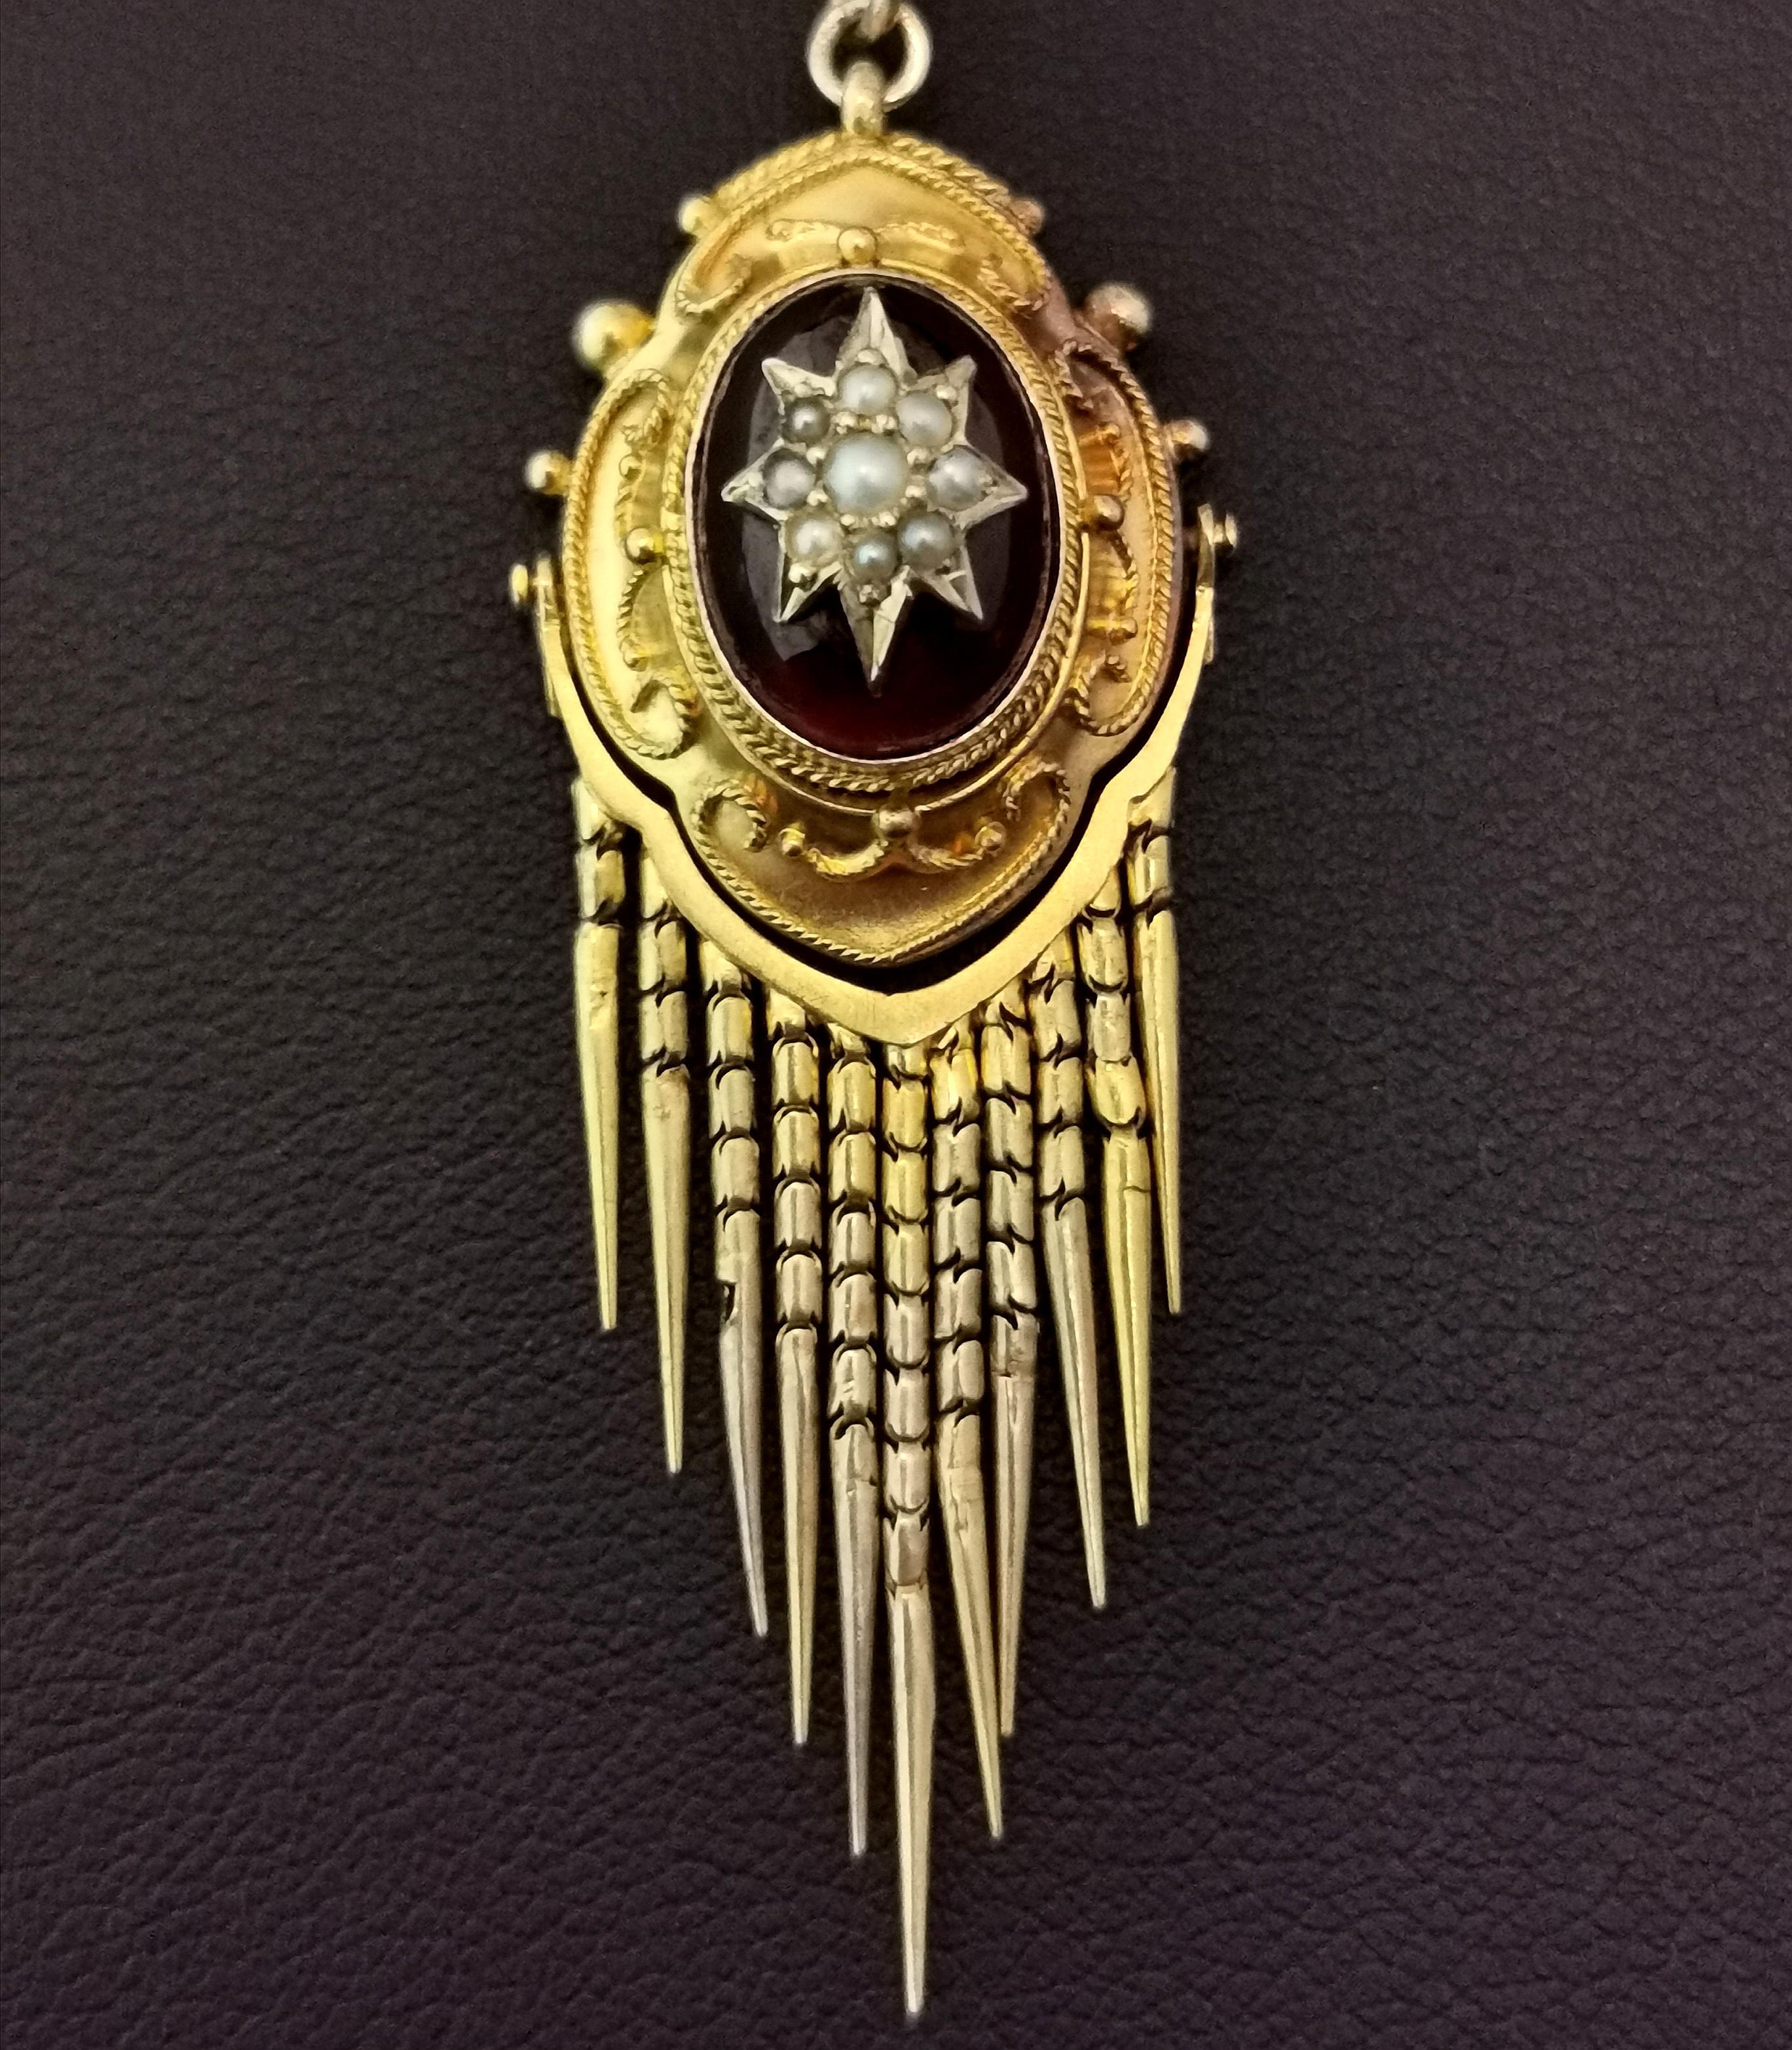 An impeccable antique, Victorian Bohemian garnet and pearl tassel pendant and necklace.

This stunning piece is a day and night pendant, the shimmery foxtail fringe can be unclipped from the body to create a more sophisticated day look and added for